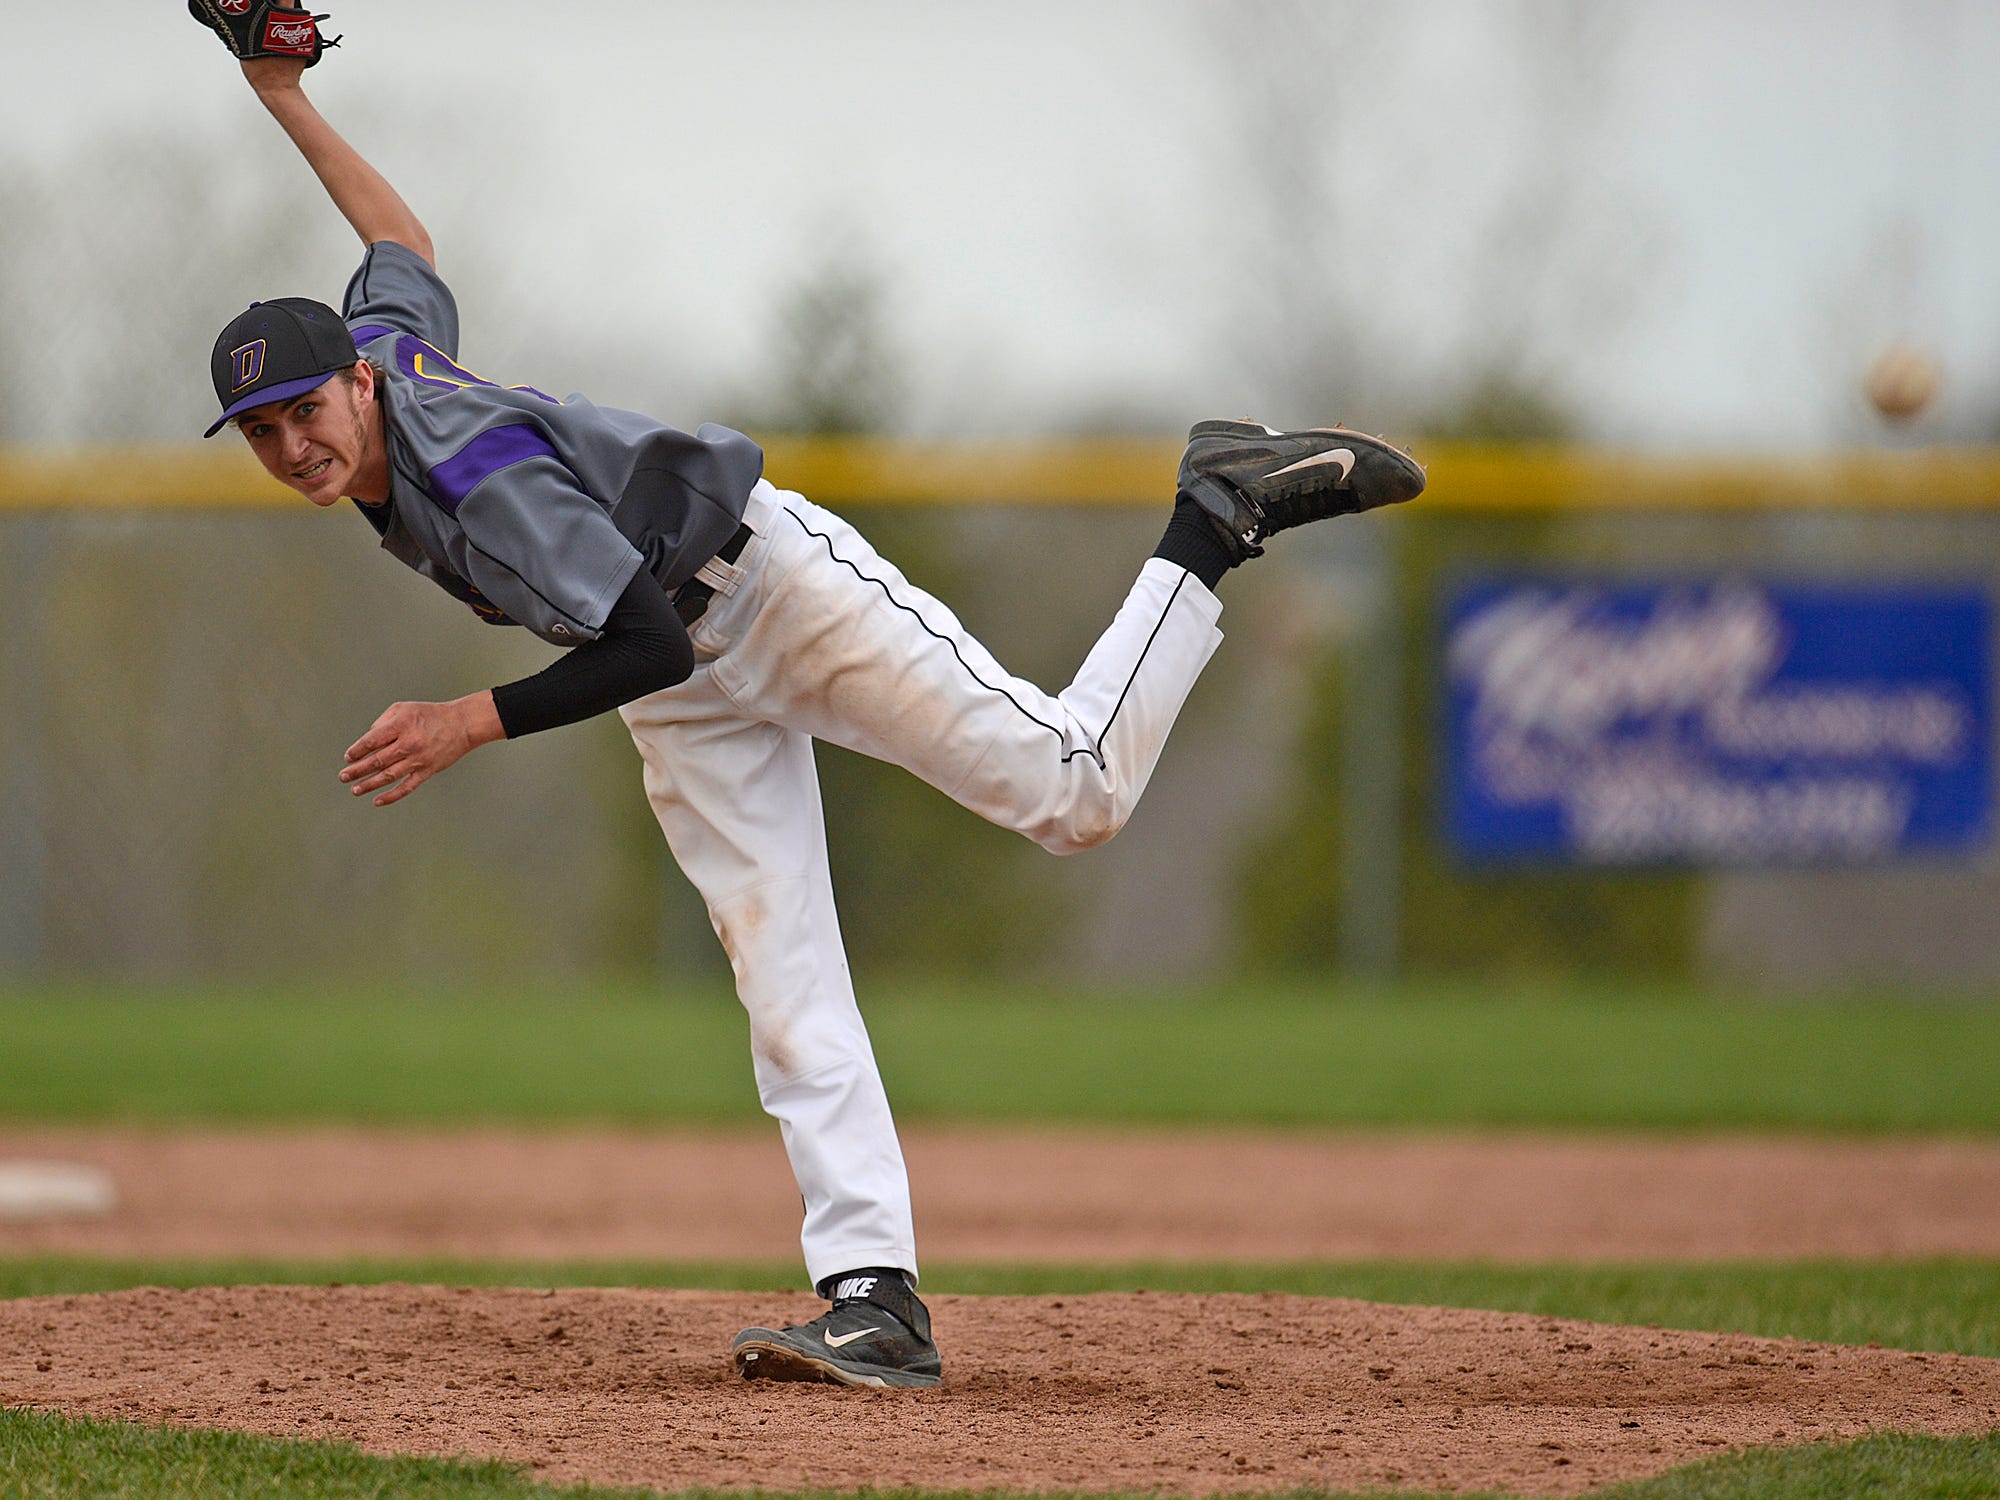 Denmark pitcher Riley Pelischek allowed one hit and struck out 14 in a 2-1 win over West De Pere in a battle of Bay Conference unbeatens Tuesday.